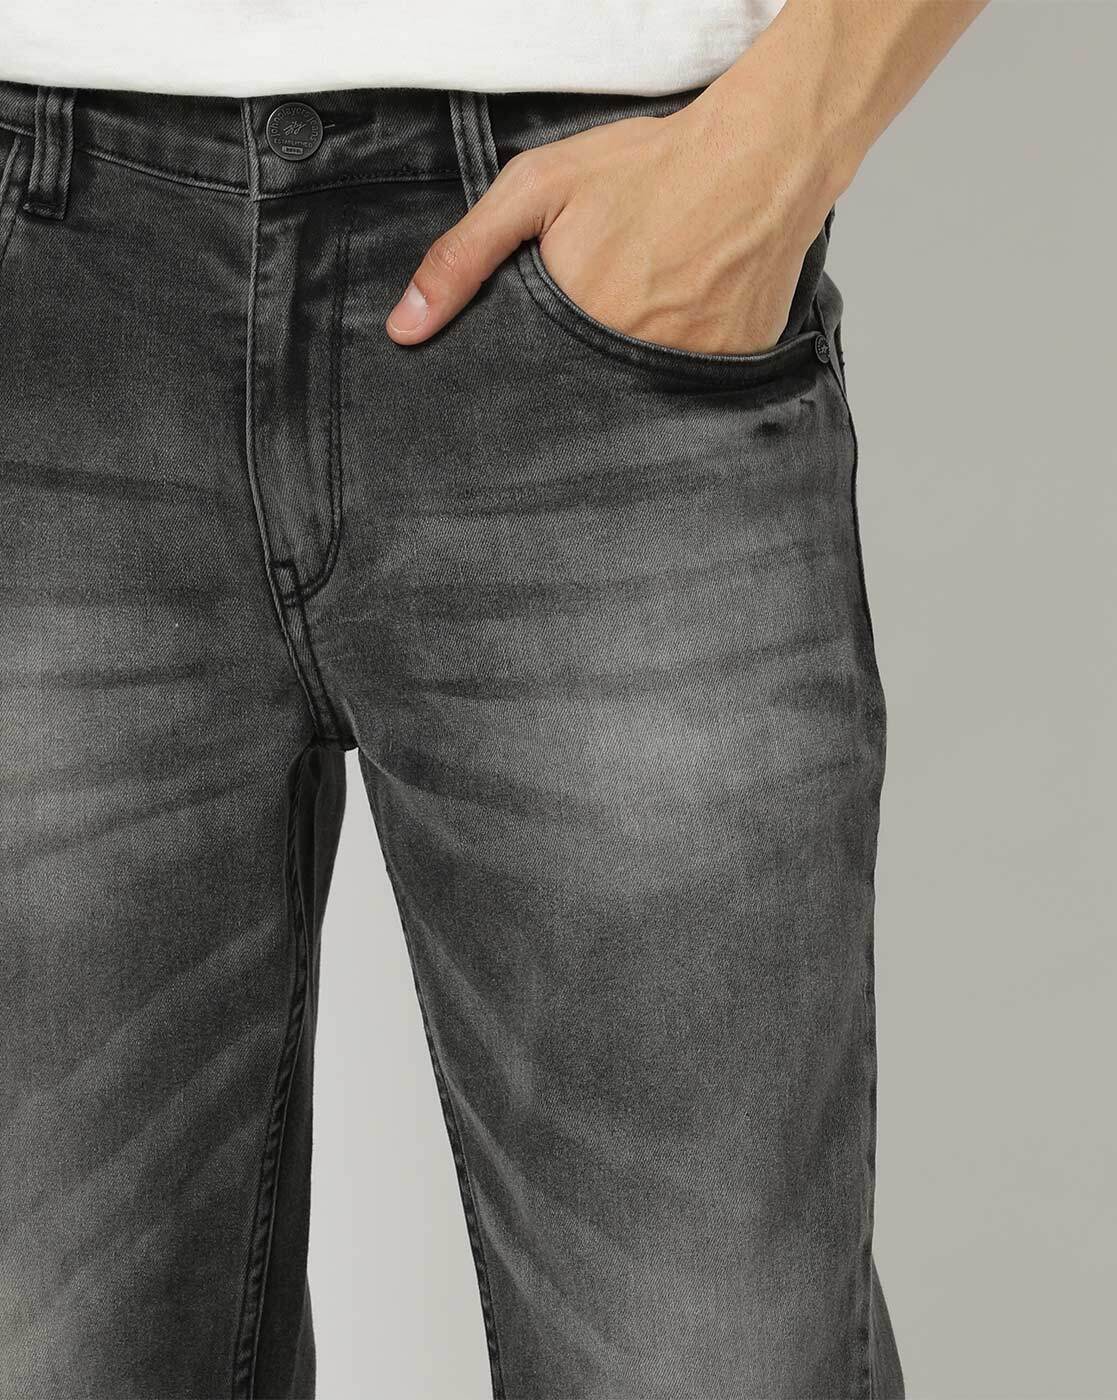 Buy Grey Jeans for Men by JOHN PLAYERS JEANS Online